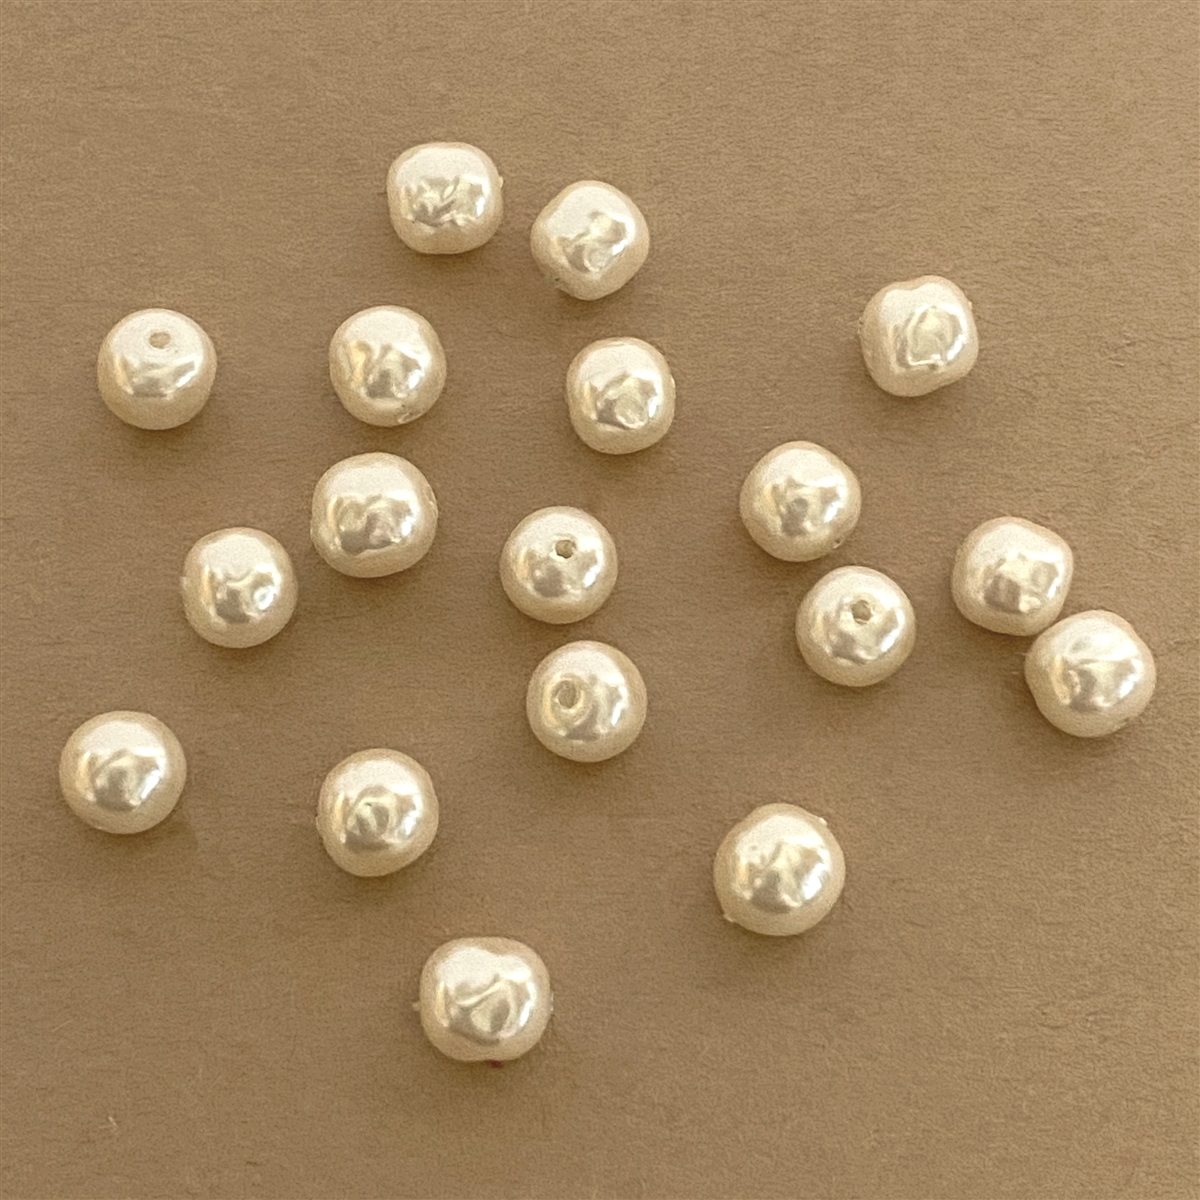 Wholesale FINGERINSPIRE 60 Pcs 25mm Beige Flat Back Pearl Extral Large  Cabochon Half Pearls Bead with Container Large Half Round Pearl Loose Beads  Gems for Shoes Wedding Dress Phone DIY Crafts Making 